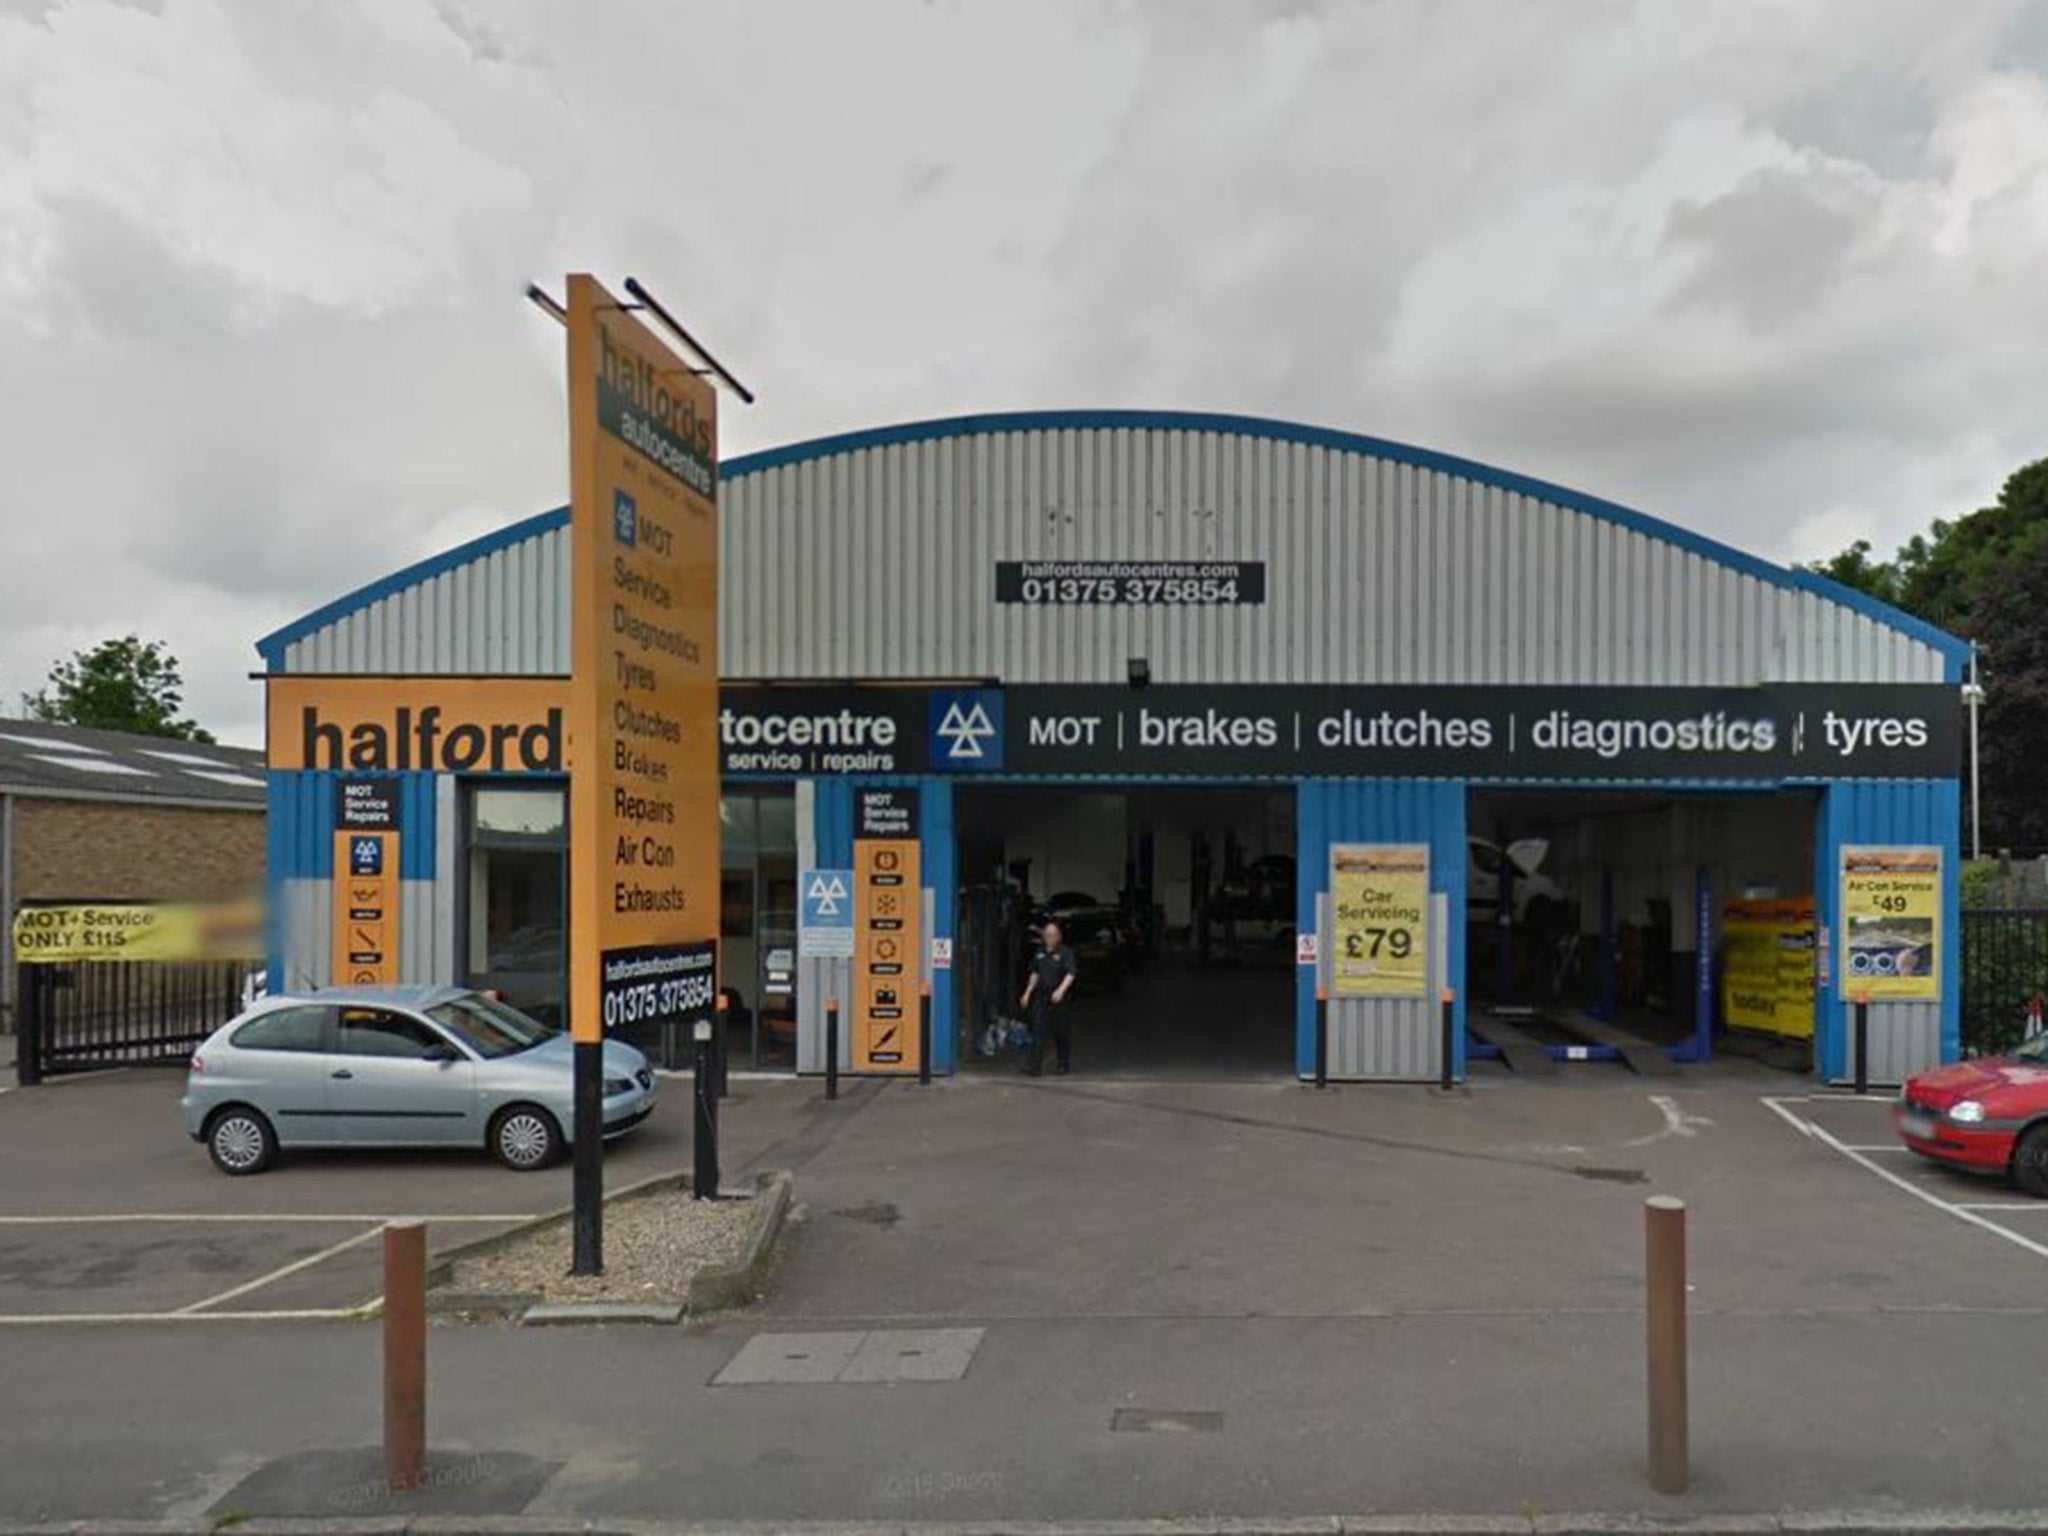 The Halfords Autocentre in Grays, Essex where the incident occurs